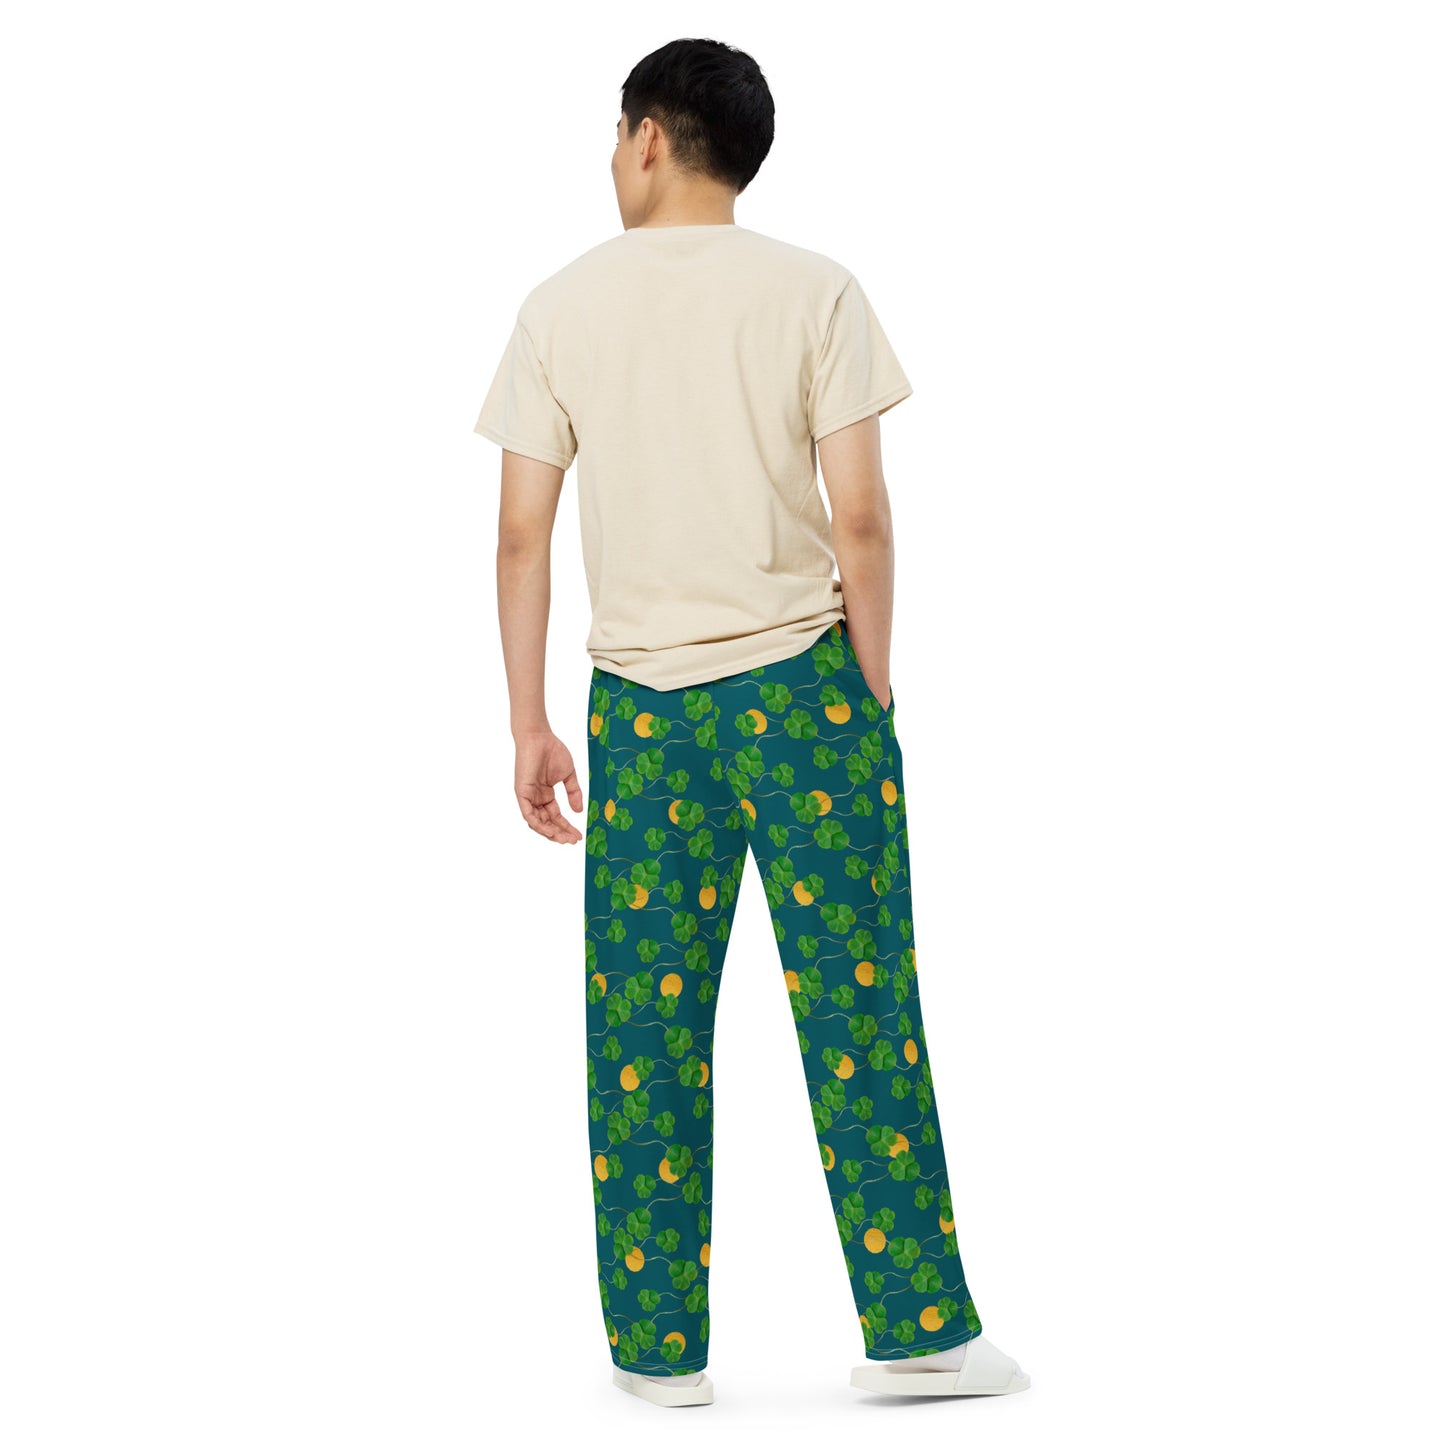 Unisex wide leg pants with side pockets, elastic waistband and drawstring.  Design features pattern of three-leaf clover and lucky gold coins on a blue-green background. Back view on male model.